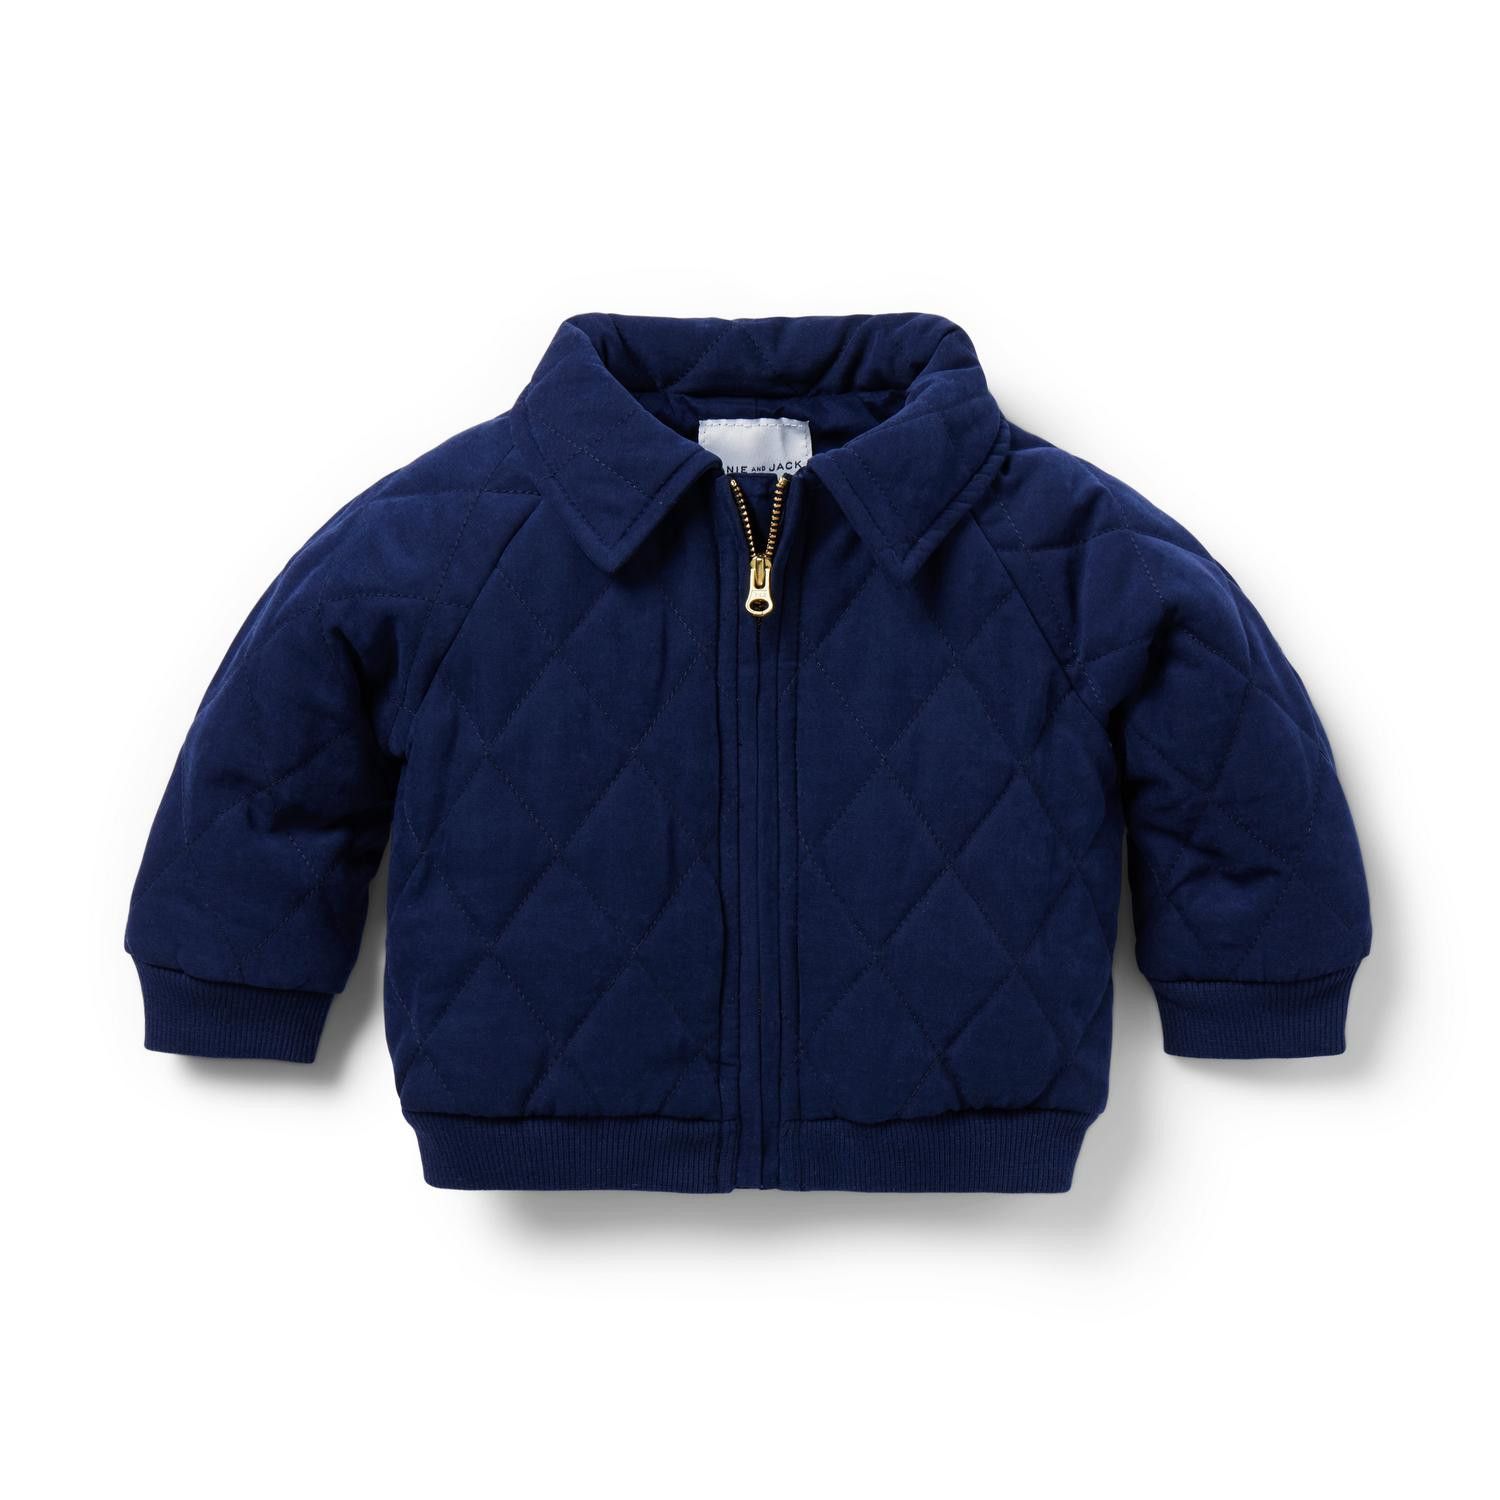 BABY QUILTED BOMBER JACKET | Janie and Jack